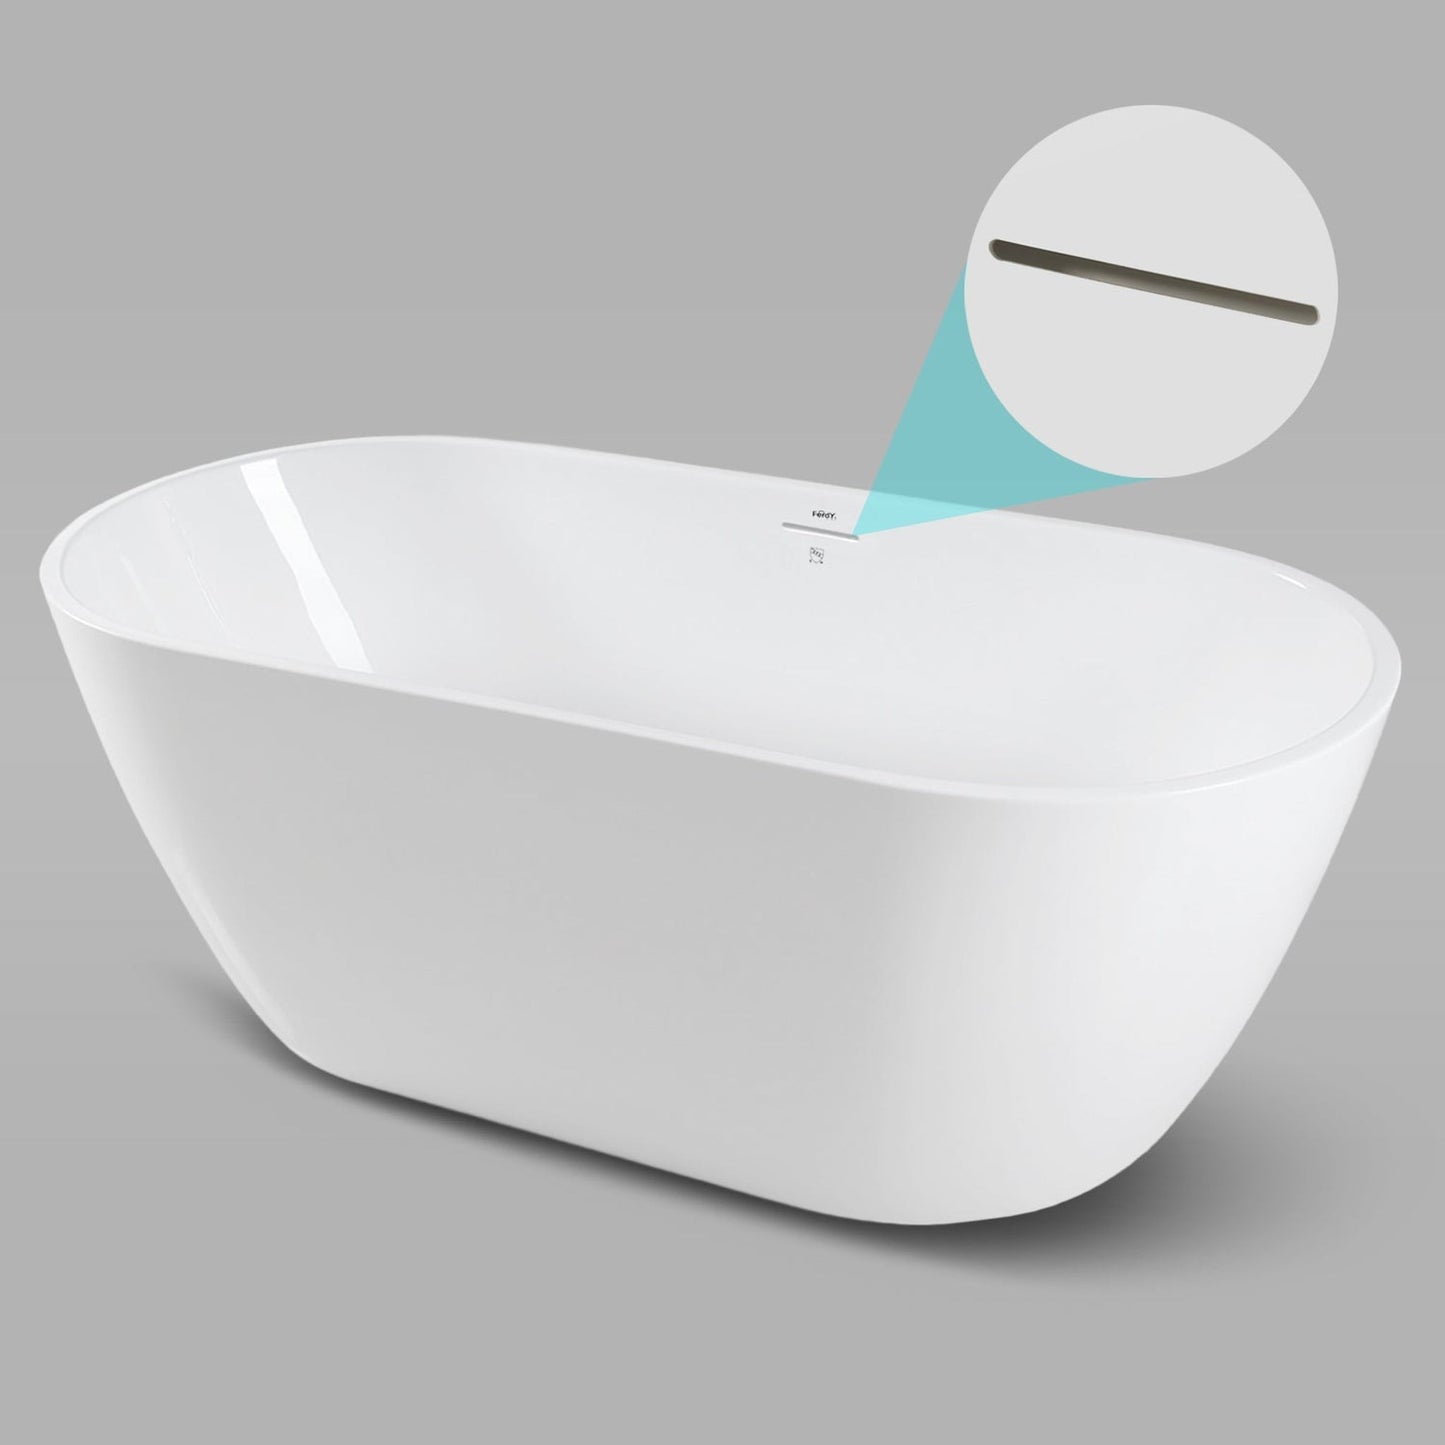 FerdY Bali 59" x 28" Oval Glossy White Acrylic Freestanding Double Slipper Soaking Bathtub With Brushed Nickel Drain and Overflow